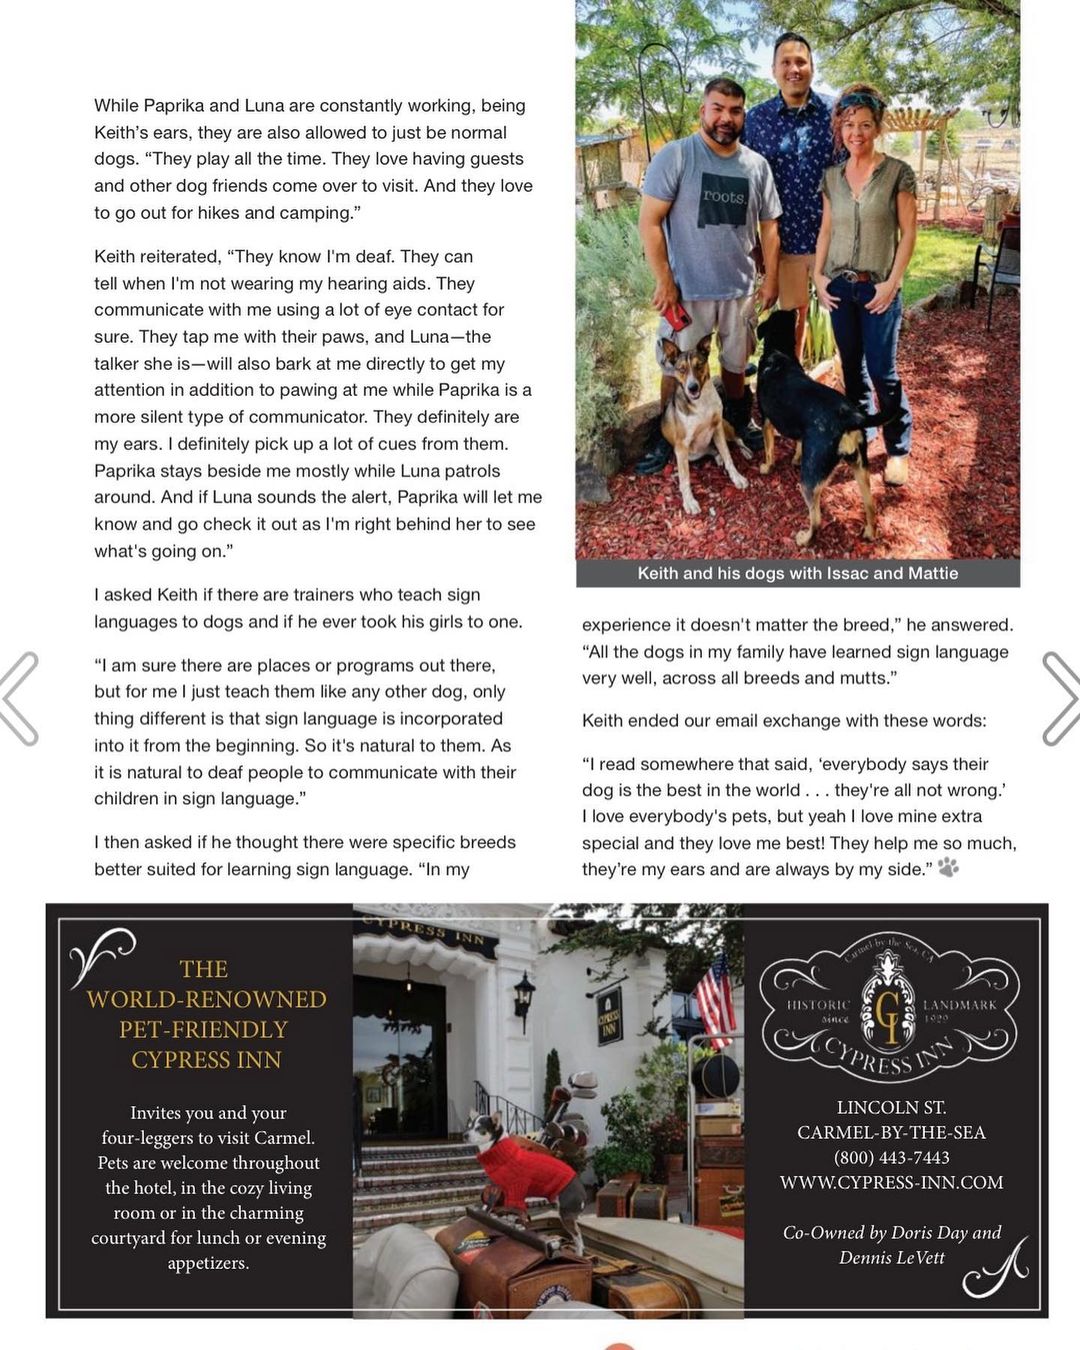 Española Humane alumni get some dog beach vibes in California’s Coastal Canine Magazine! Publishers of the magazine read our article about Keith King and his ASL-trained dogs Luna and Paprika in The Santa Fe New Mexican and reached out to us for a story - see photo on page 8 and the story starts on page 20 (and we share the magazine with Emmylou Harris?!? Swoon!) The piece is a heartwarming mutual-rescue tale about how our adopted dogs have become Keith’s ears, and beloved constant companions.

Luna also has the distinct honor of being our very first puppy adopted from our Puppy Patch at @ojosantaferesort !

🐾 Read it here: https://issuu.com/coastalcanine/docs/cc_fall_2021

🐾Coastal Canine Website:  http://www.coastalcaninemag.com/index.html

@goodvibesike @claudiamardel @boomerpg @barkingmadchick @raechiecakes 

<a target='_blank' href='https://www.instagram.com/explore/tags/coastalcanine/'>#coastalcanine</a> <a target='_blank' href='https://www.instagram.com/explore/tags/california/'>#california</a> <a target='_blank' href='https://www.instagram.com/explore/tags/dogbeach/'>#dogbeach</a> <a target='_blank' href='https://www.instagram.com/explore/tags/beach/'>#beach</a> <a target='_blank' href='https://www.instagram.com/explore/tags/beachvibes/'>#beachvibes</a> <a target='_blank' href='https://www.instagram.com/explore/tags/dogsofnewmexico/'>#dogsofnewmexico</a> <a target='_blank' href='https://www.instagram.com/explore/tags/santafe/'>#santafe</a> <a target='_blank' href='https://www.instagram.com/explore/tags/espa/'>#espa</a>ñola <a target='_blank' href='https://www.instagram.com/explore/tags/taos/'>#taos</a> <a target='_blank' href='https://www.instagram.com/explore/tags/losalamos/'>#losalamos</a> <a target='_blank' href='https://www.instagram.com/explore/tags/albuquerque/'>#albuquerque</a> <a target='_blank' href='https://www.instagram.com/explore/tags/abiquiu/'>#abiquiu</a> <a target='_blank' href='https://www.instagram.com/explore/tags/ojocaliente/'>#ojocaliente</a> <a target='_blank' href='https://www.instagram.com/explore/tags/deaf/'>#deaf</a> <a target='_blank' href='https://www.instagram.com/explore/tags/asl/'>#asl</a> <a target='_blank' href='https://www.instagram.com/explore/tags/aslinterpreter/'>#aslinterpreter</a> <a target='_blank' href='https://www.instagram.com/explore/tags/servicedog/'>#servicedog</a> <a target='_blank' href='https://www.instagram.com/explore/tags/assistancedog/'>#assistancedog</a> <a target='_blank' href='https://www.instagram.com/explore/tags/signlanguage/'>#signlanguage</a> <a target='_blank' href='https://www.instagram.com/explore/tags/hearingimpaired/'>#hearingimpaired</a> <a target='_blank' href='https://www.instagram.com/explore/tags/adopted/'>#adopted</a> <a target='_blank' href='https://www.instagram.com/explore/tags/adoptdontshop/'>#adoptdontshop</a> <a target='_blank' href='https://www.instagram.com/explore/tags/rescuedismyfavoritebreed/'>#rescuedismyfavoritebreed</a> <a target='_blank' href='https://www.instagram.com/explore/tags/dogsofinstagram/'>#dogsofinstagram</a> <a target='_blank' href='https://www.instagram.com/explore/tags/rescuedogsofinstagram/'>#rescuedogsofinstagram</a> <a target='_blank' href='https://www.instagram.com/explore/tags/luna/'>#luna</a> <a target='_blank' href='https://www.instagram.com/explore/tags/paprika/'>#paprika</a> <a target='_blank' href='https://www.instagram.com/explore/tags/myears/'>#myears</a> <a target='_blank' href='https://www.instagram.com/explore/tags/foreverhome/'>#foreverhome</a> <a target='_blank' href='https://www.instagram.com/explore/tags/foreverfamily/'>#foreverfamily</a>